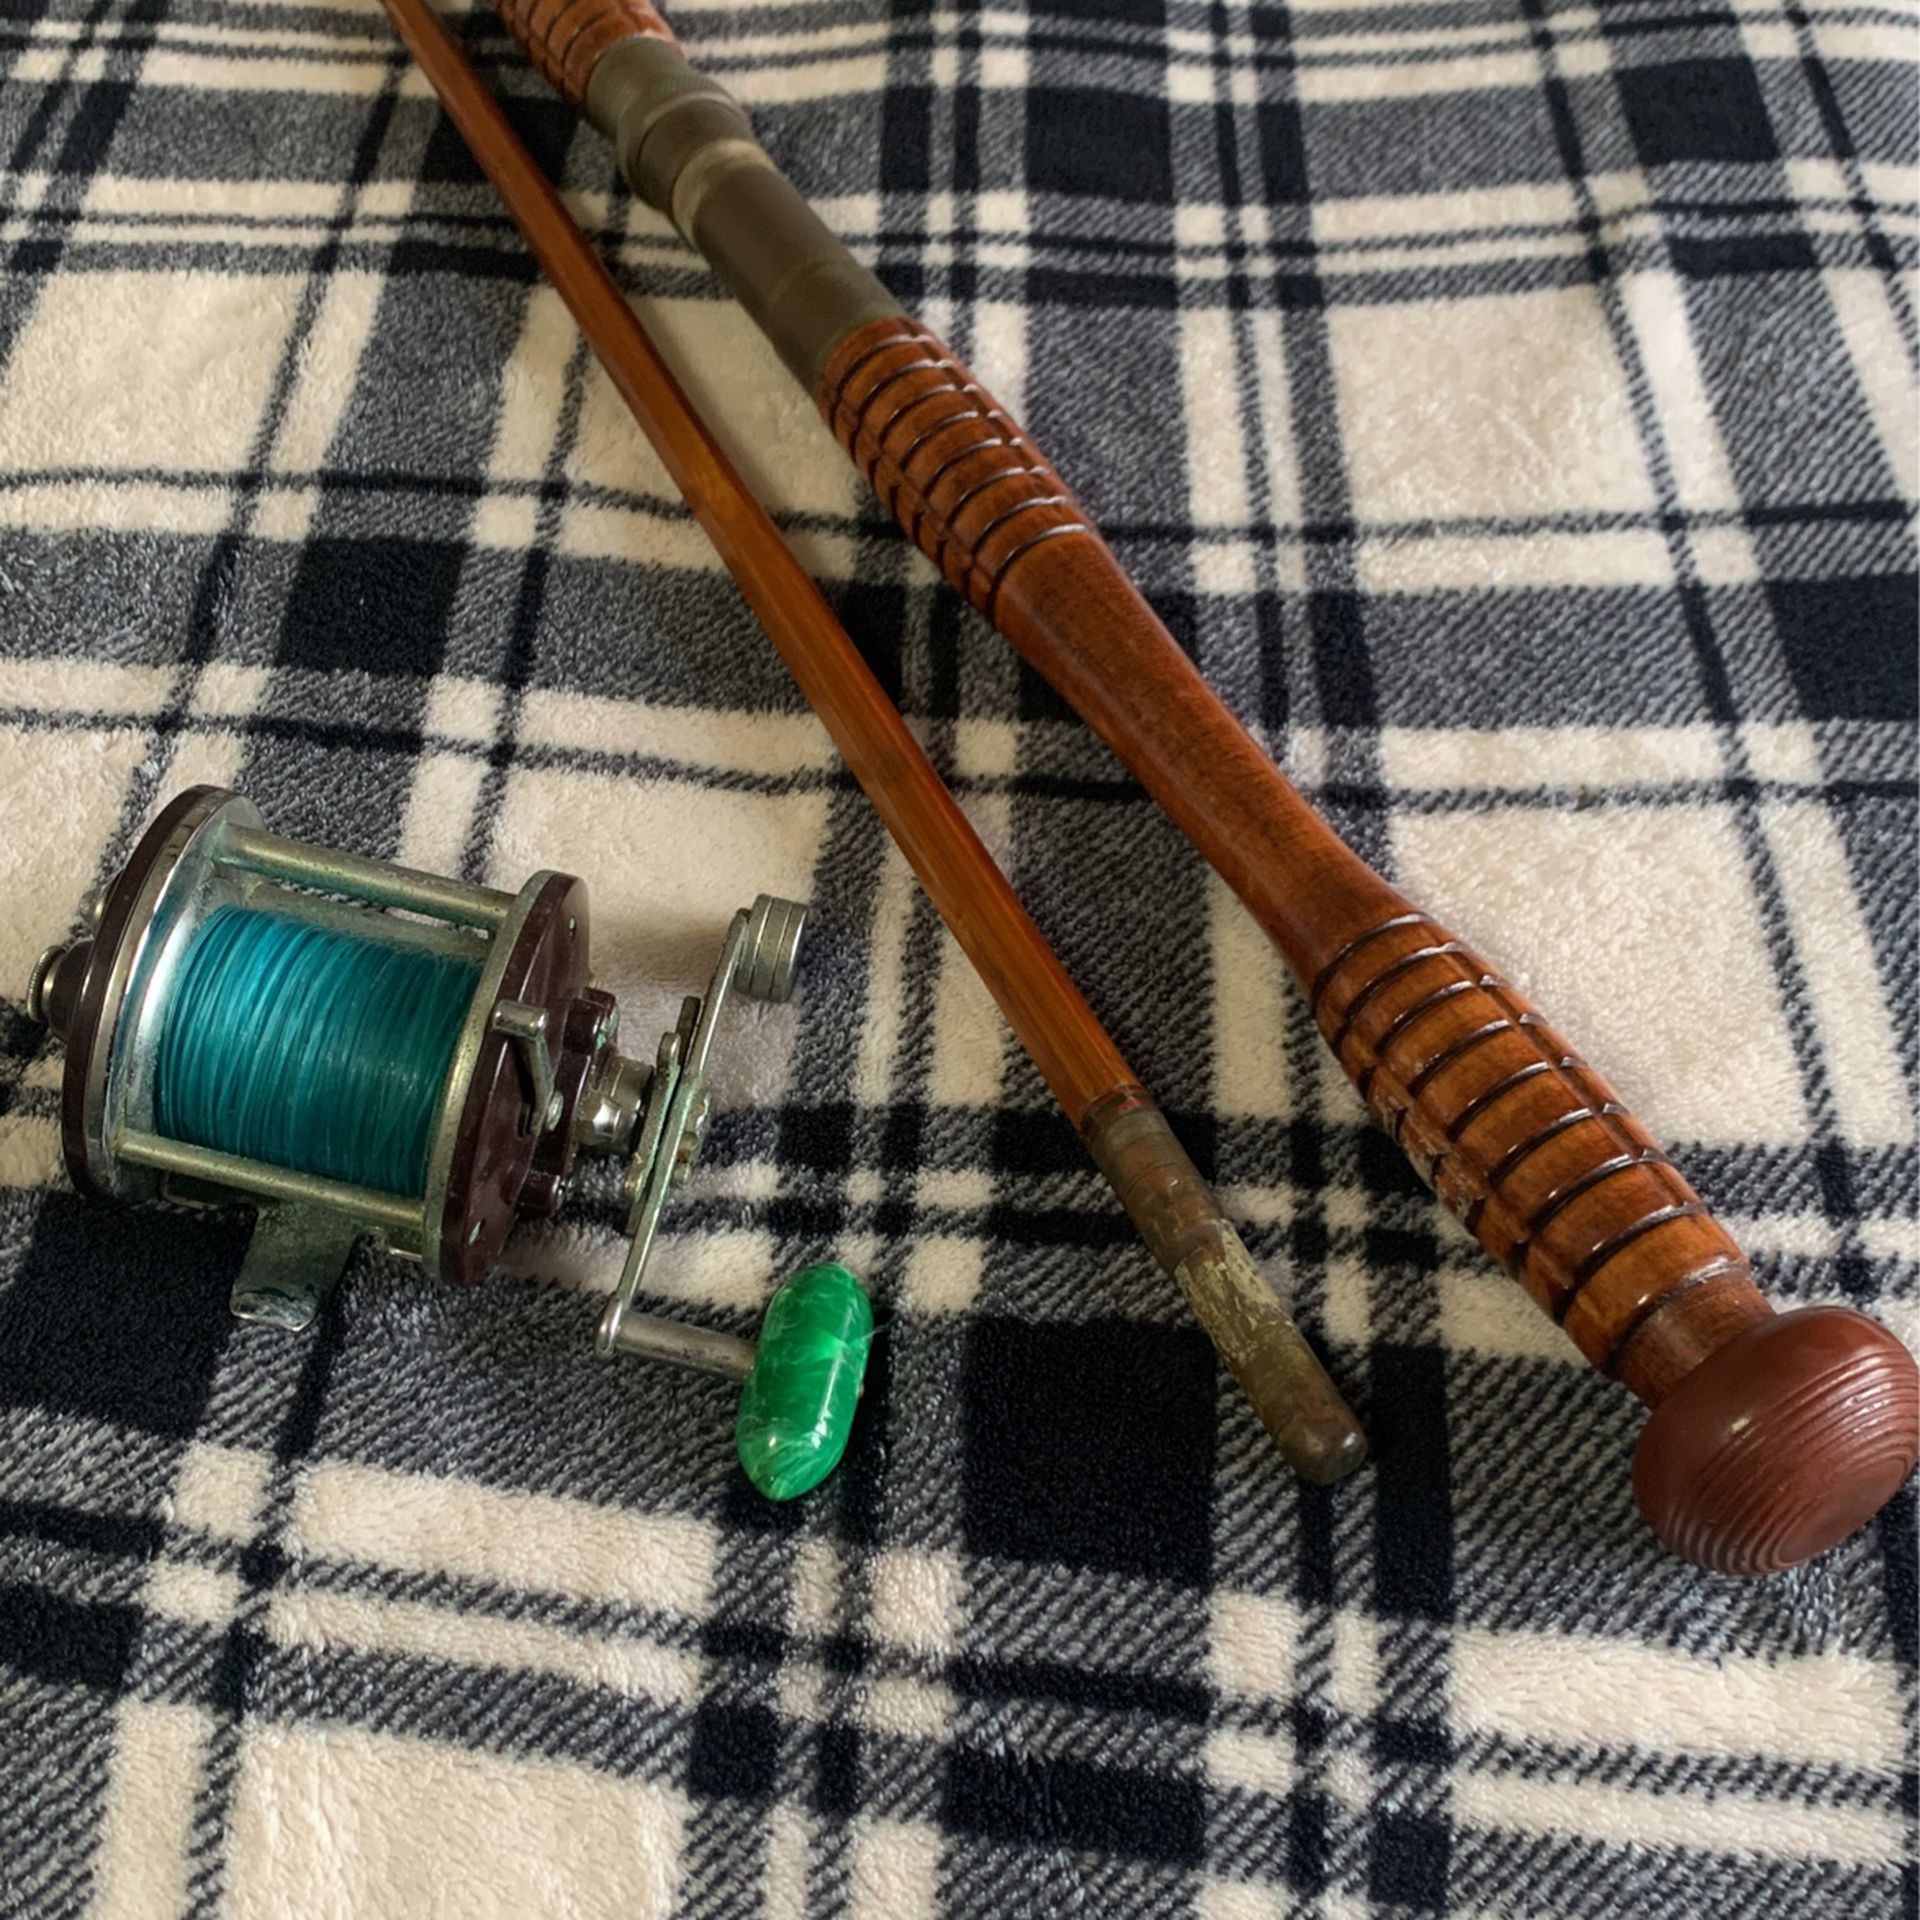 Vintage Fishing Pole and Reel 